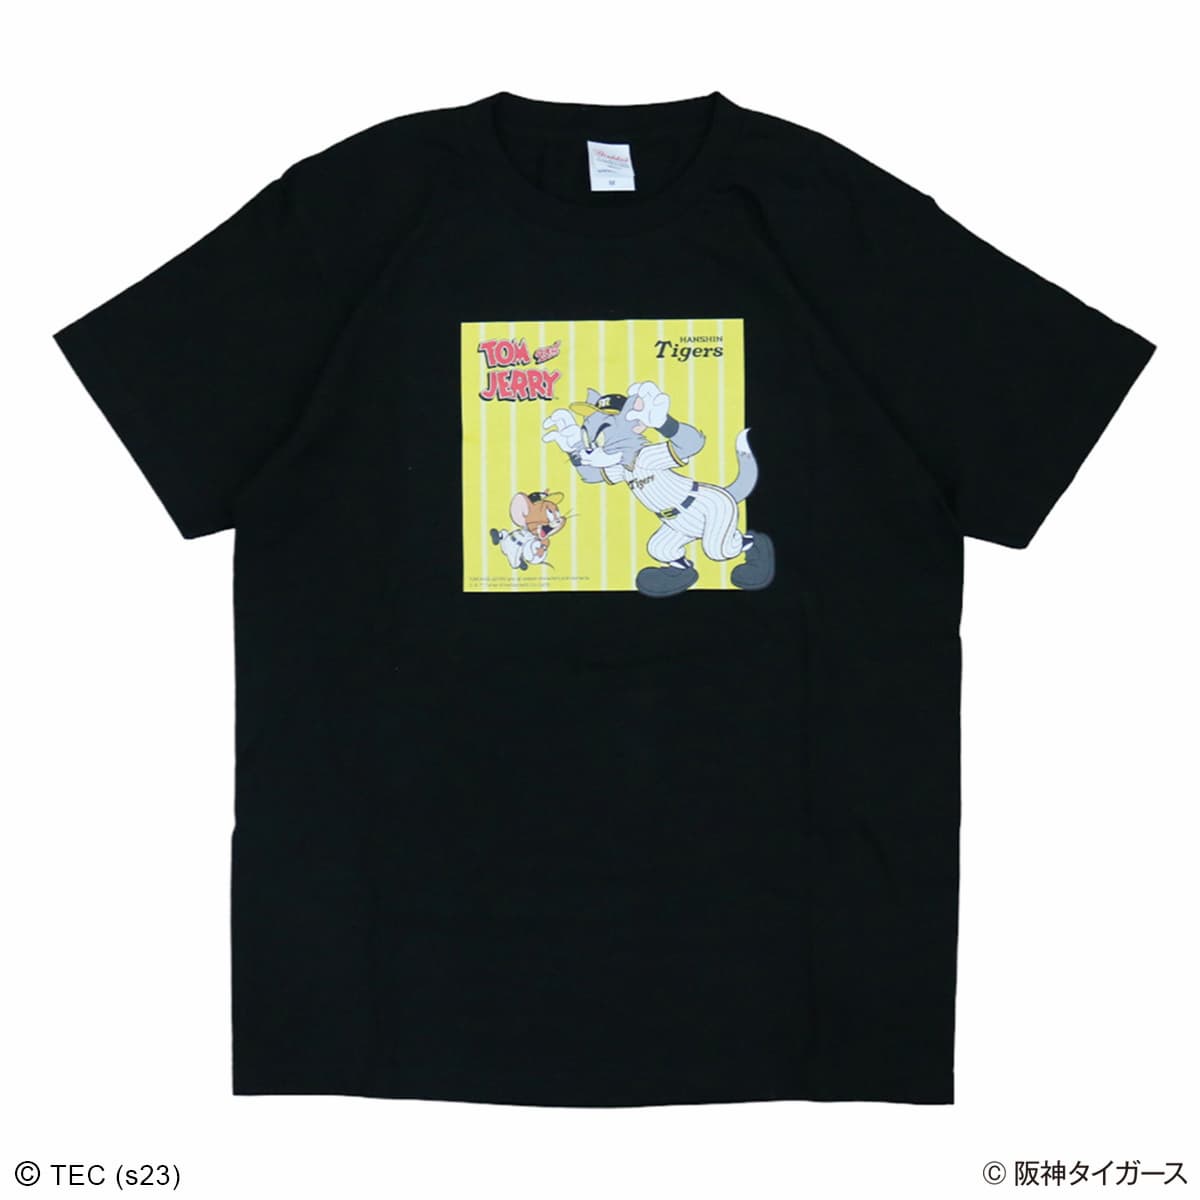 「TOM and JERRY&times;阪神タイガース Tシャツ」3,960円（税込）